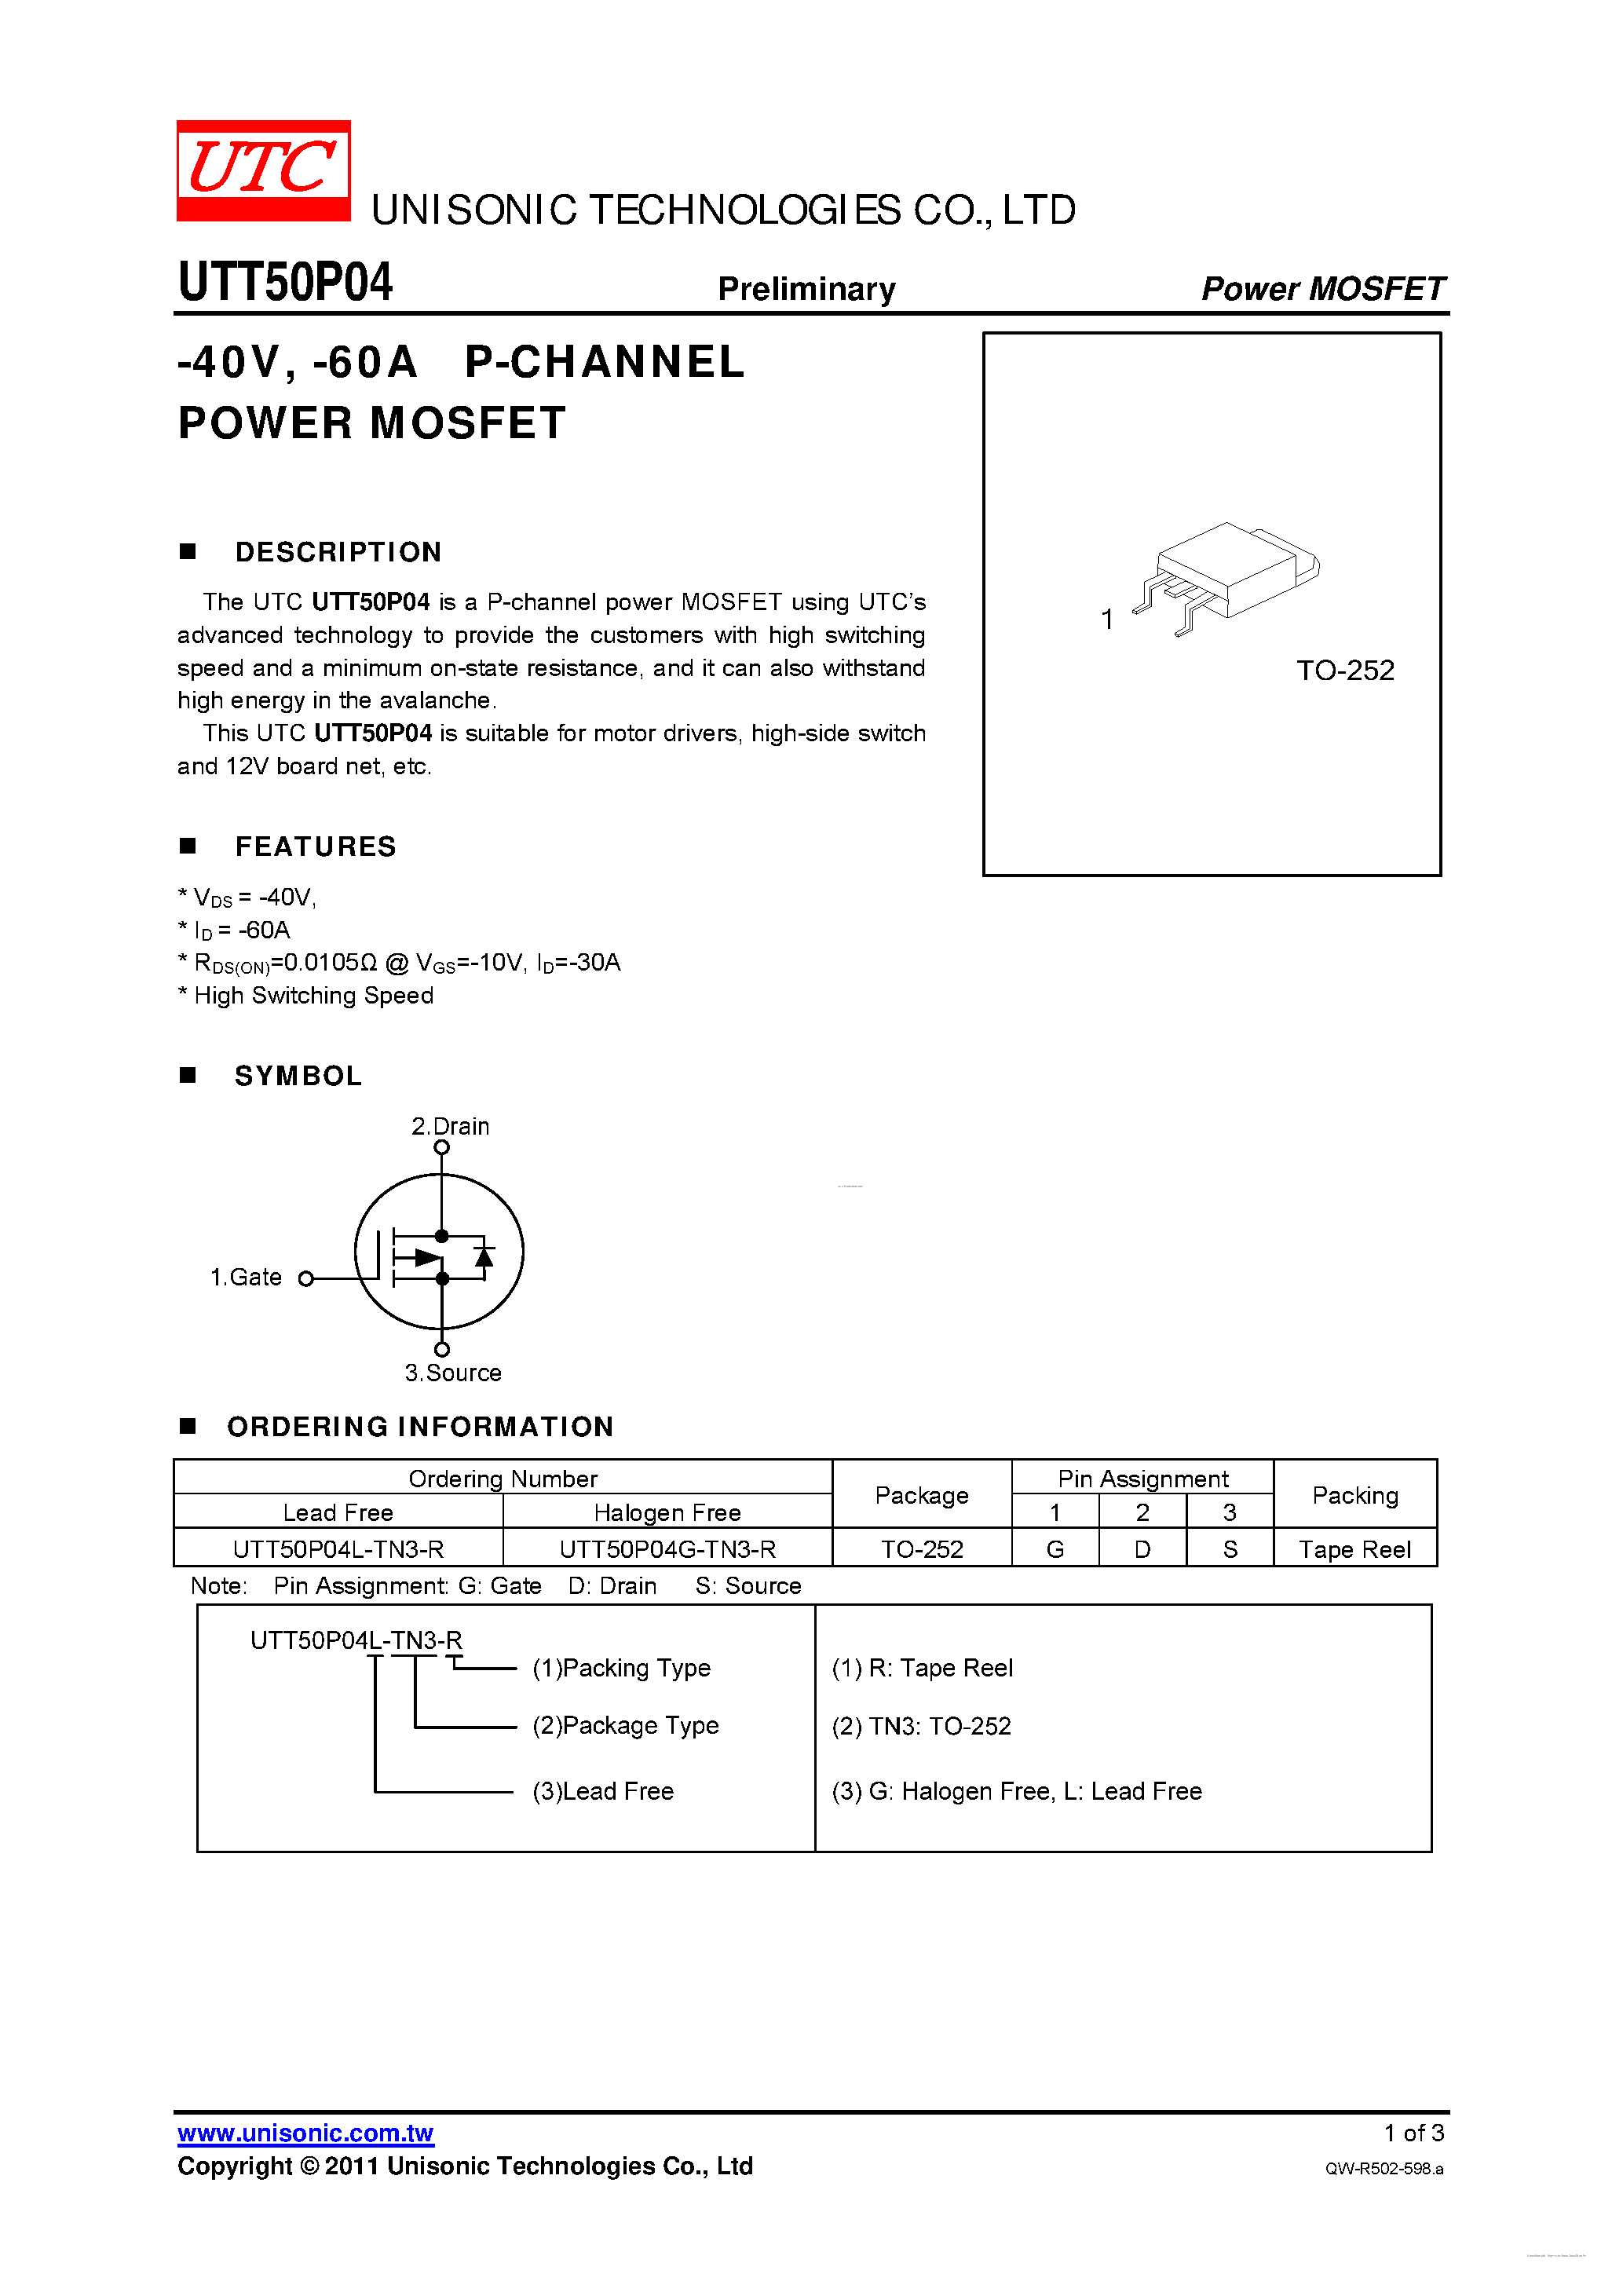 Datasheet UTT50P04 - P-CHANNEL POWER MOSFET page 1